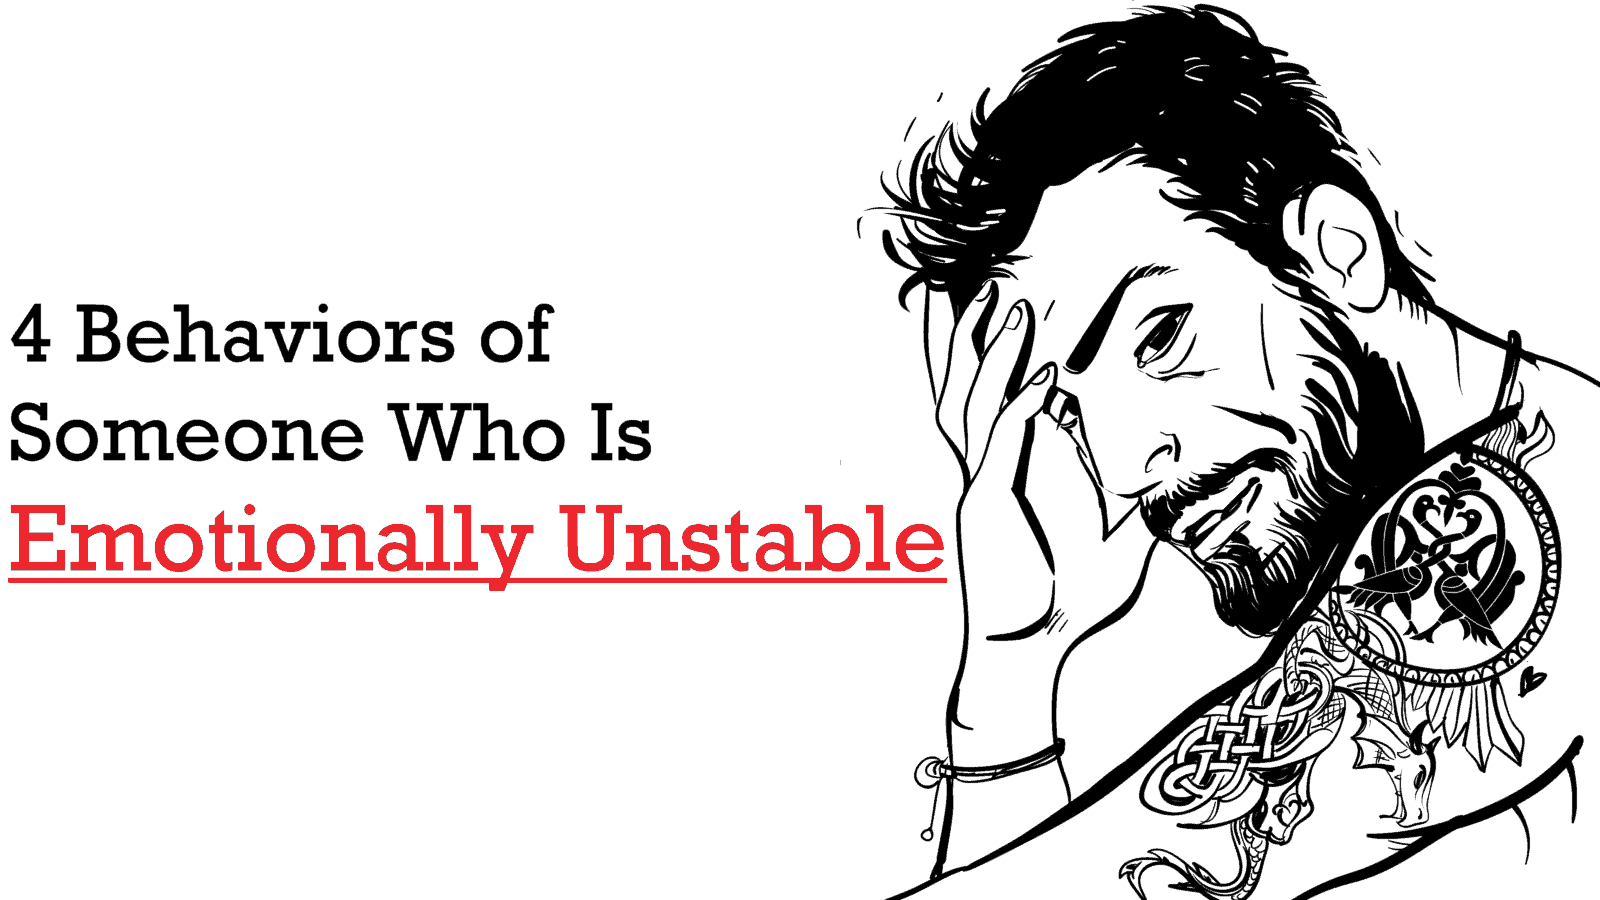 4 Behaviors of Someone Who is Emotionally Unstable